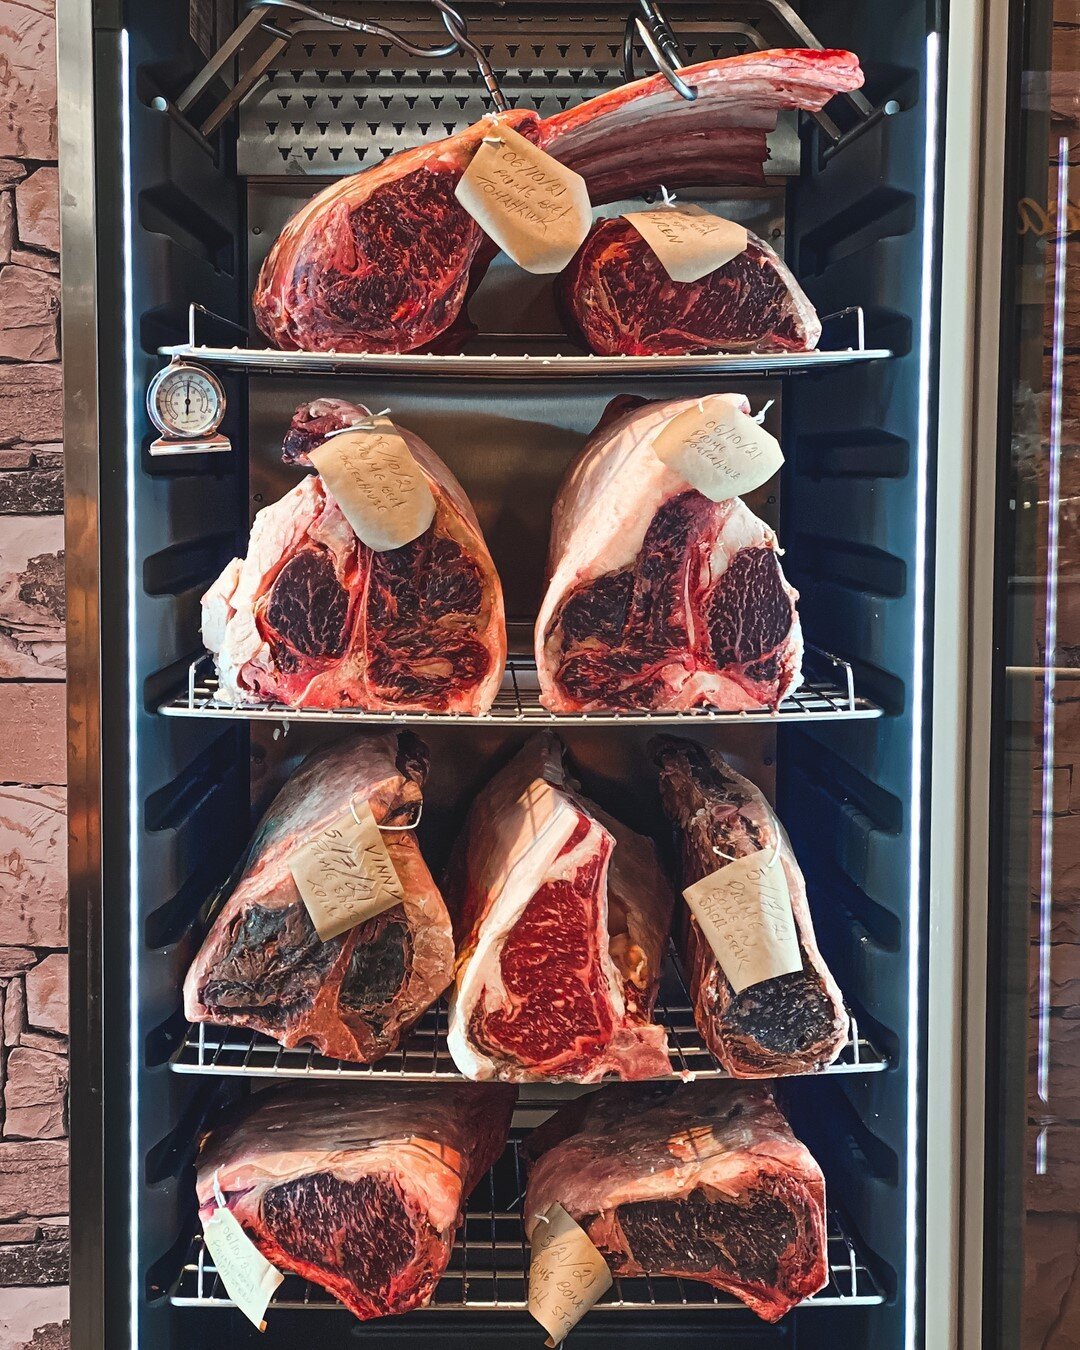 Did you know meat is about 75 percent water? If you loose a few percent to evaporation, the flavor is guaranteed to be more concentrated&hellip;imagine how these guys taste after a minimum 28 day set? 🥩 #dryaged #mymarket⠀⠀⠀⠀⠀⠀⠀⠀⠀
⠀⠀⠀⠀⠀⠀⠀⠀⠀
⠀⠀⠀⠀⠀⠀⠀⠀